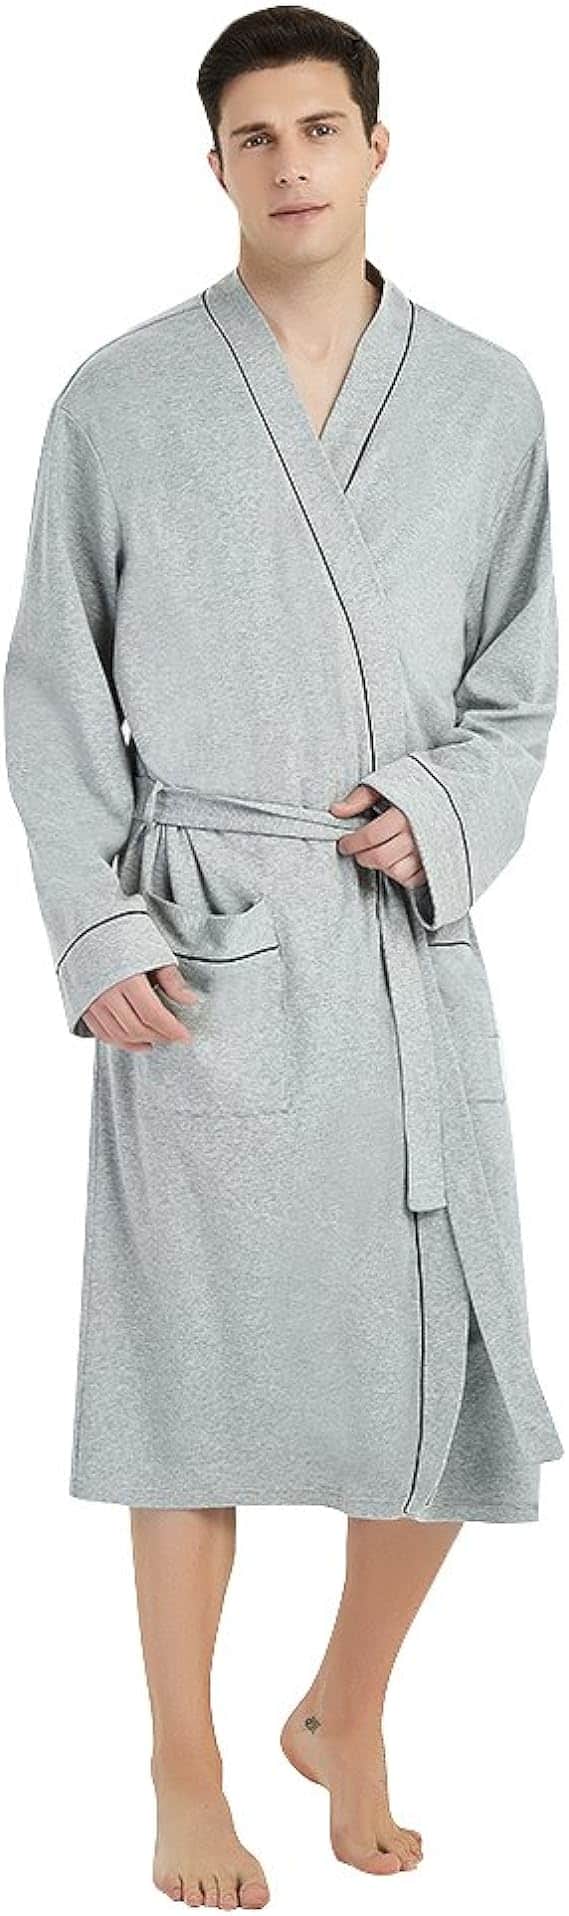 Cotton Robe: first time dad gift